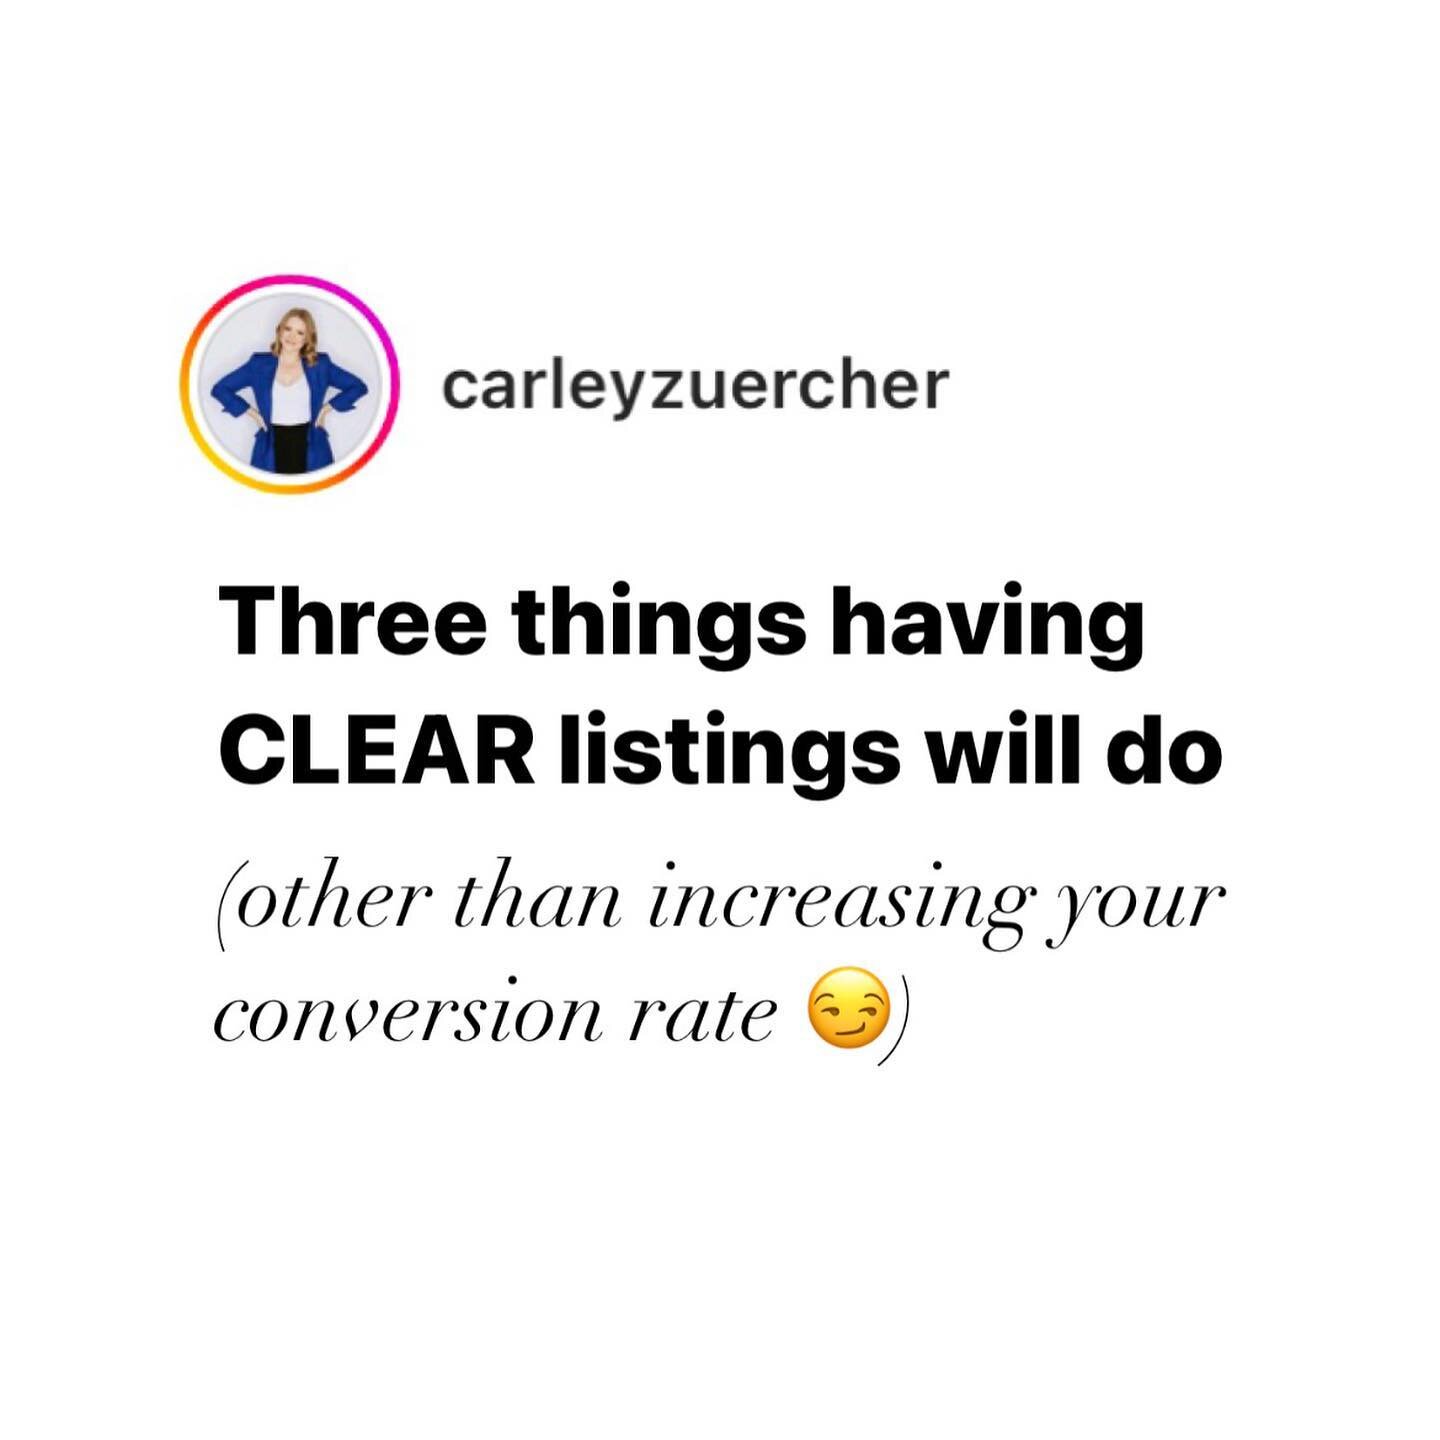 The first one is why I&rsquo;m pushing conversion over SEO rn 🤑 because you naturally do both!!
.
I have so much to say about conversation rates + clear listings, which we&rsquo;ll go over in my $27 class next week! But what questions can I answer f